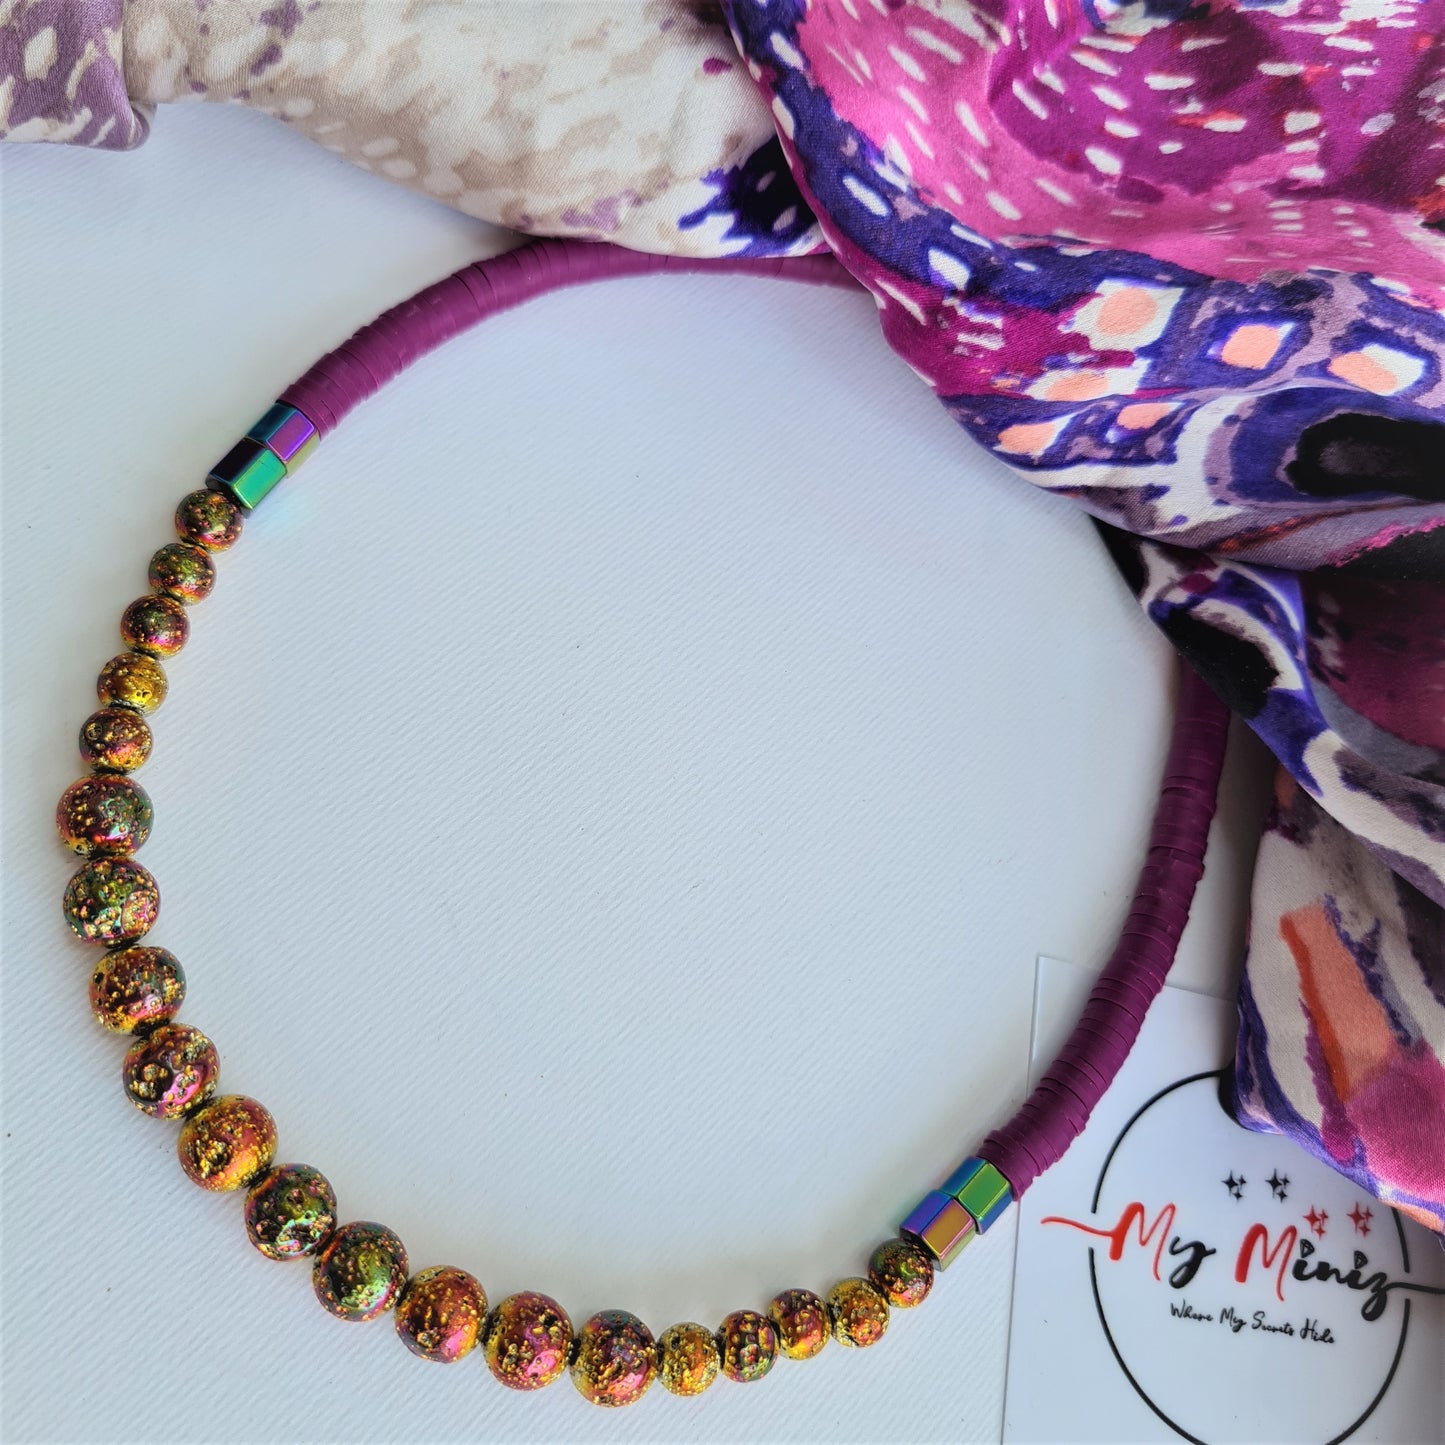 Surfer beads "Galaxy" necklace